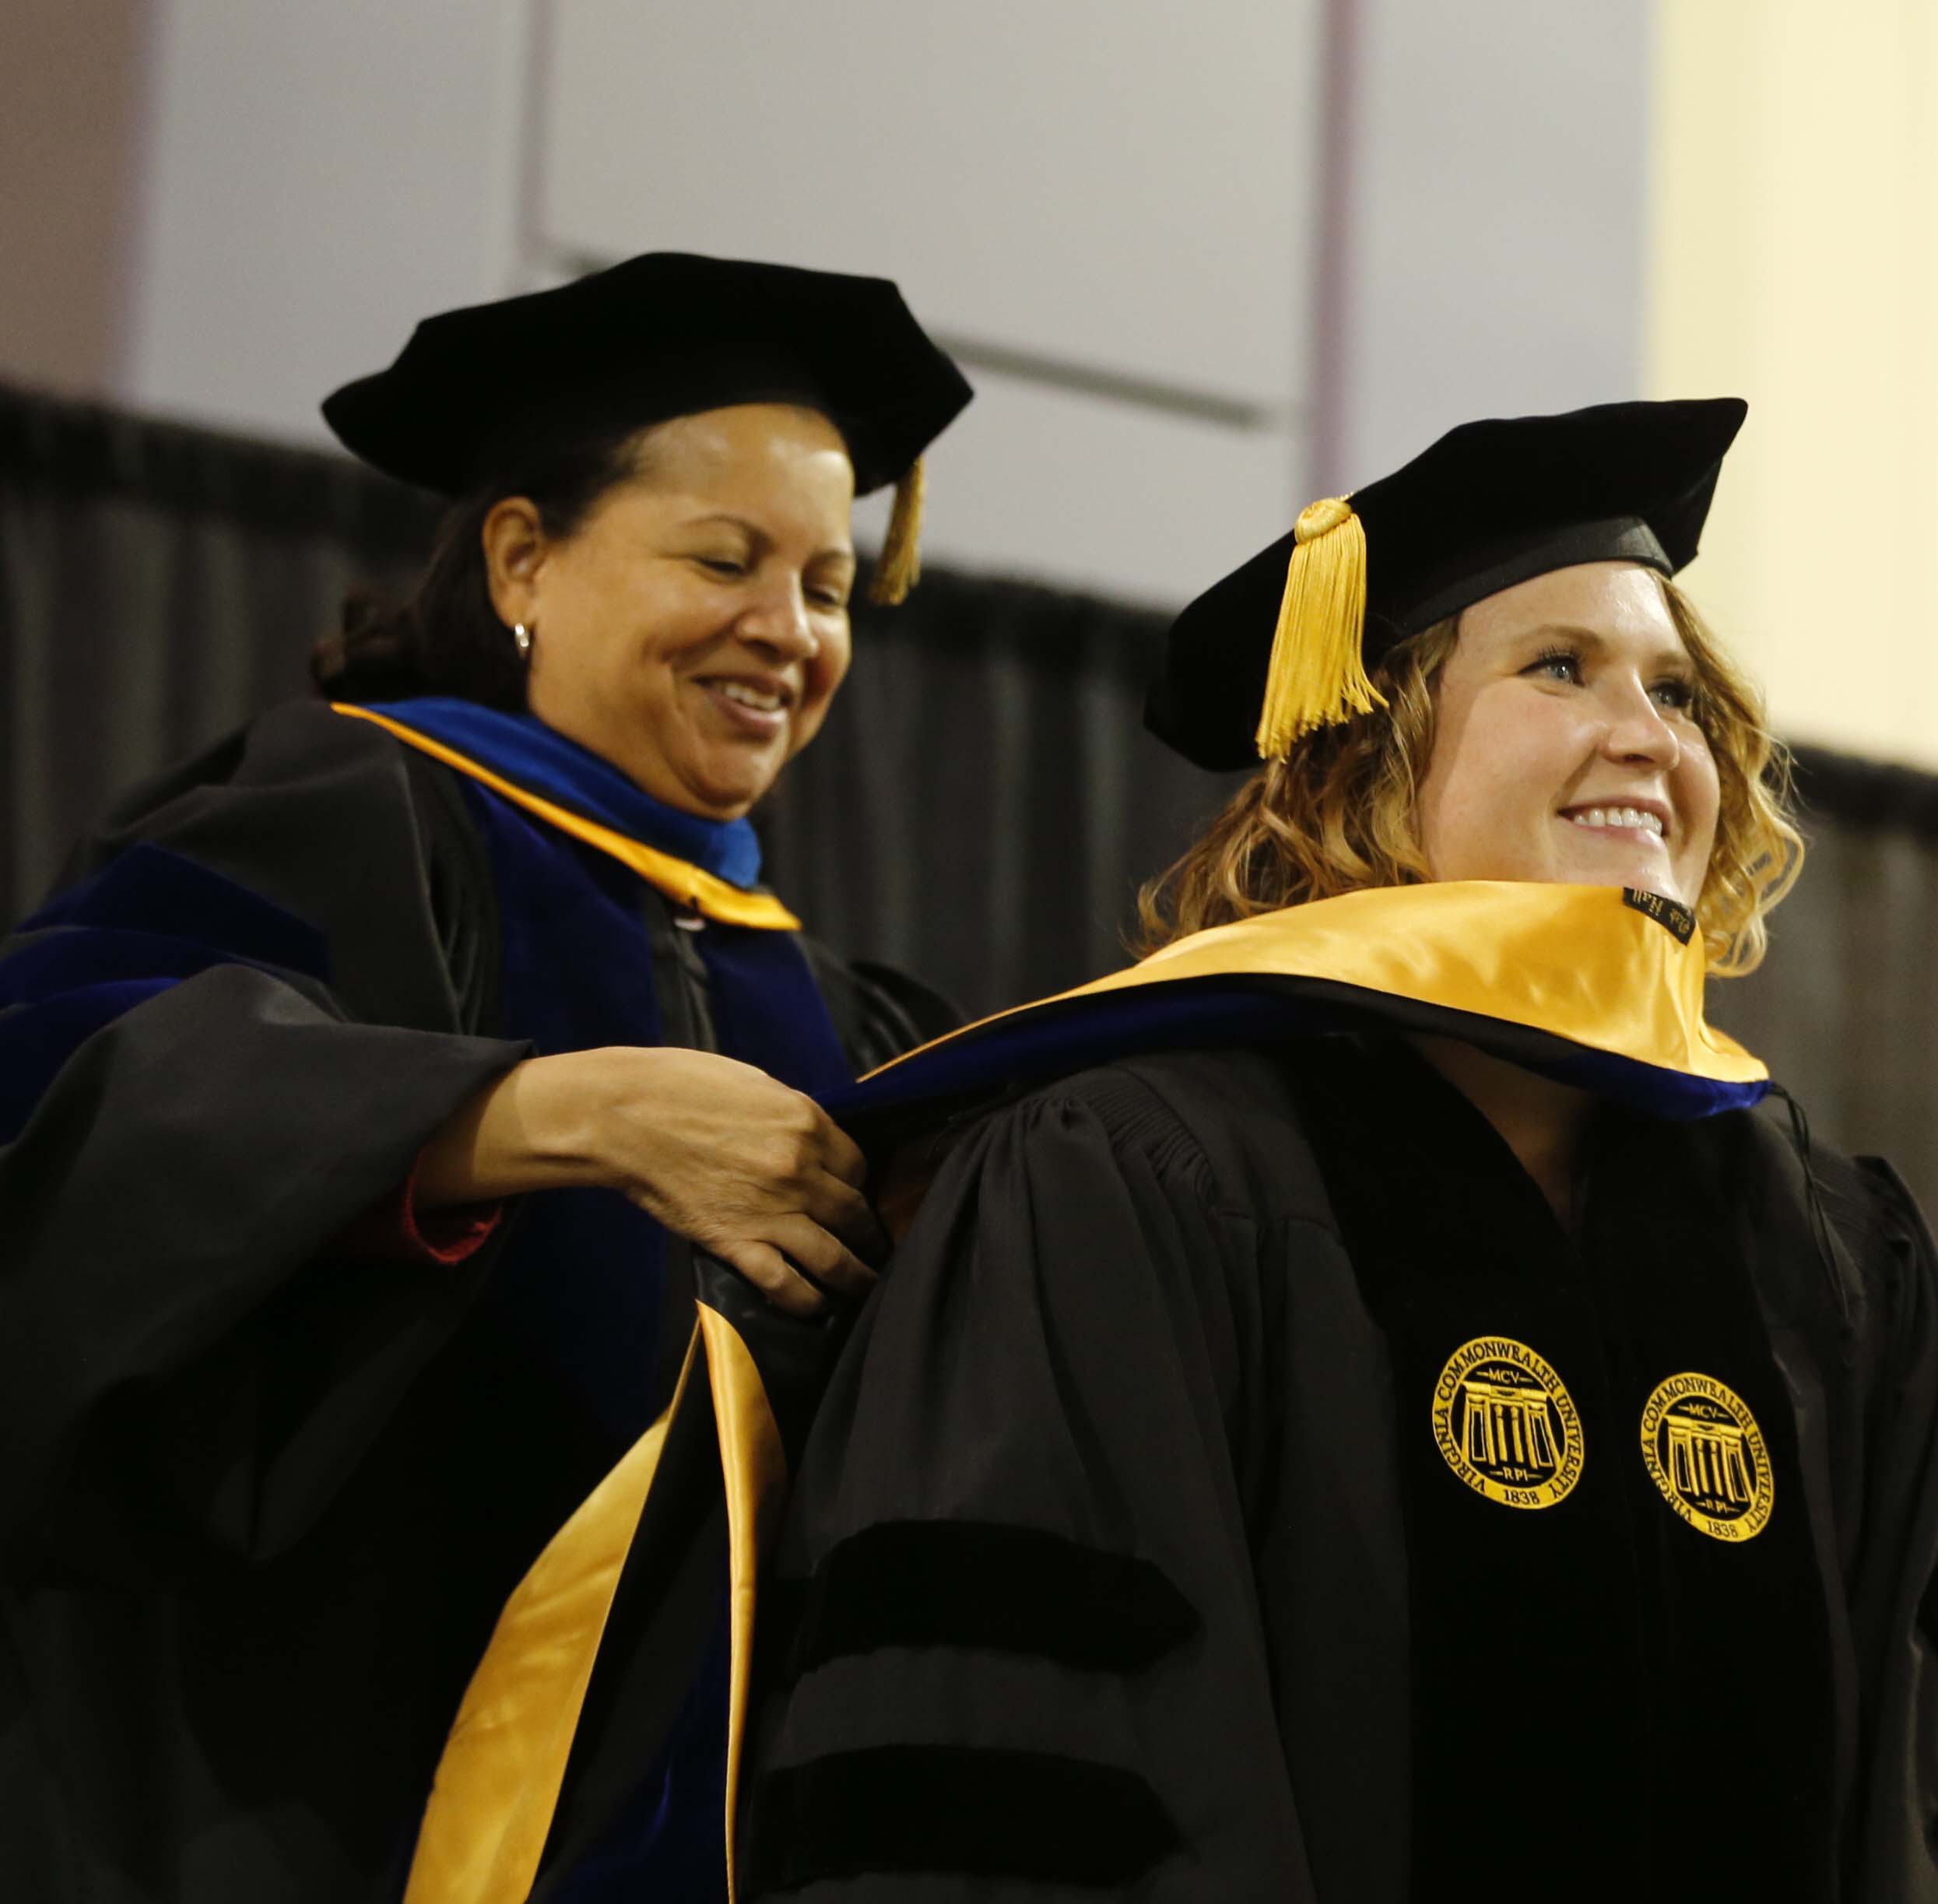 Dr. Susan Gooden presents Lindsey Evans with her hood during the Wilder School's doctoral hooding ceremony on December 9, 2017.